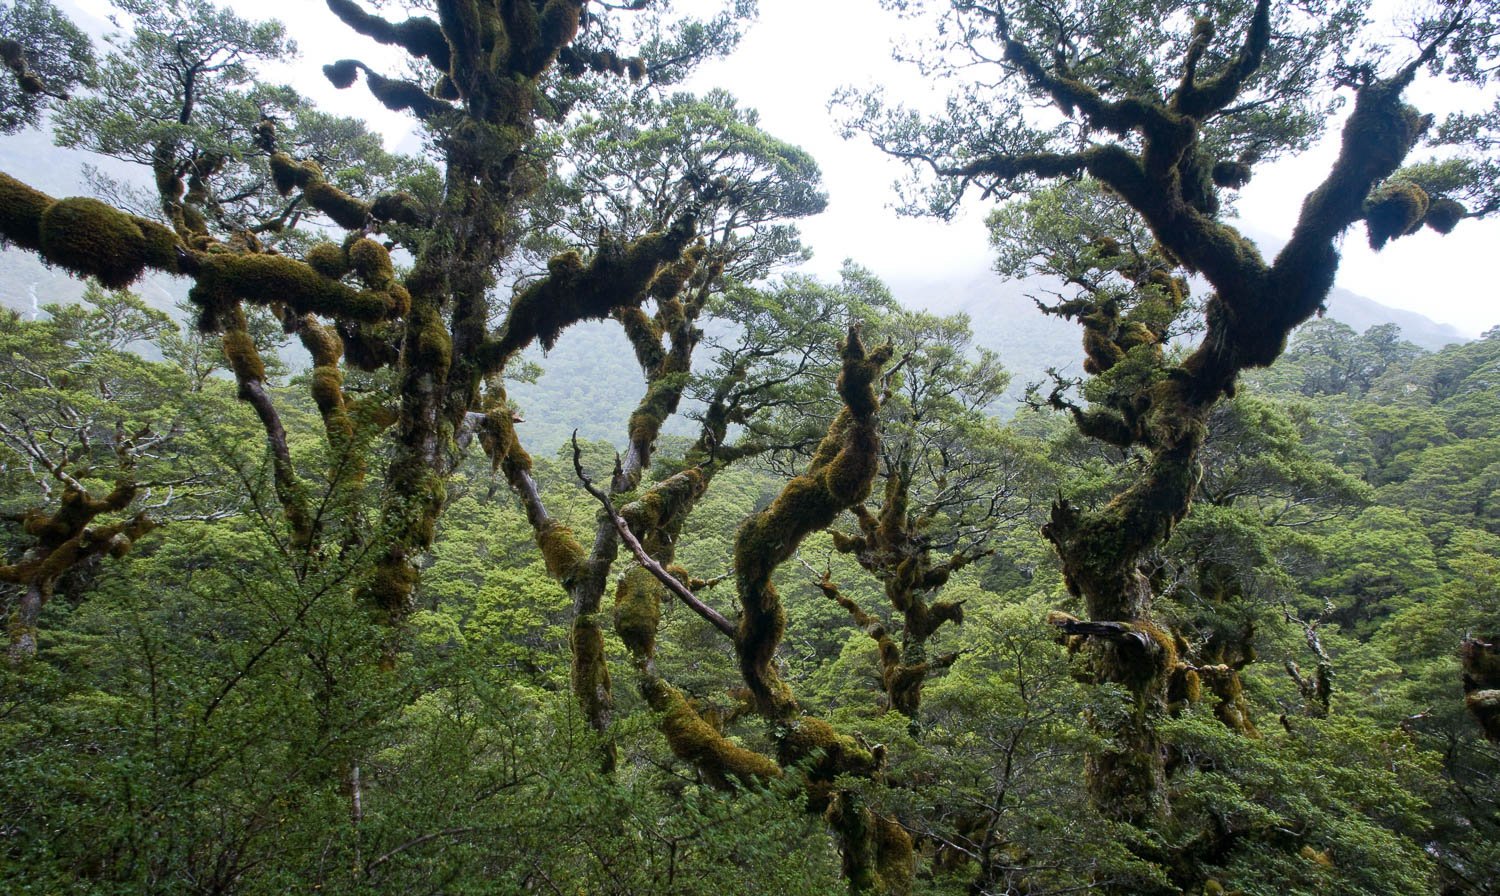 Group of wavy trees in a forest, Rainforest Canopy #2, Routeburn Track - New Zealand